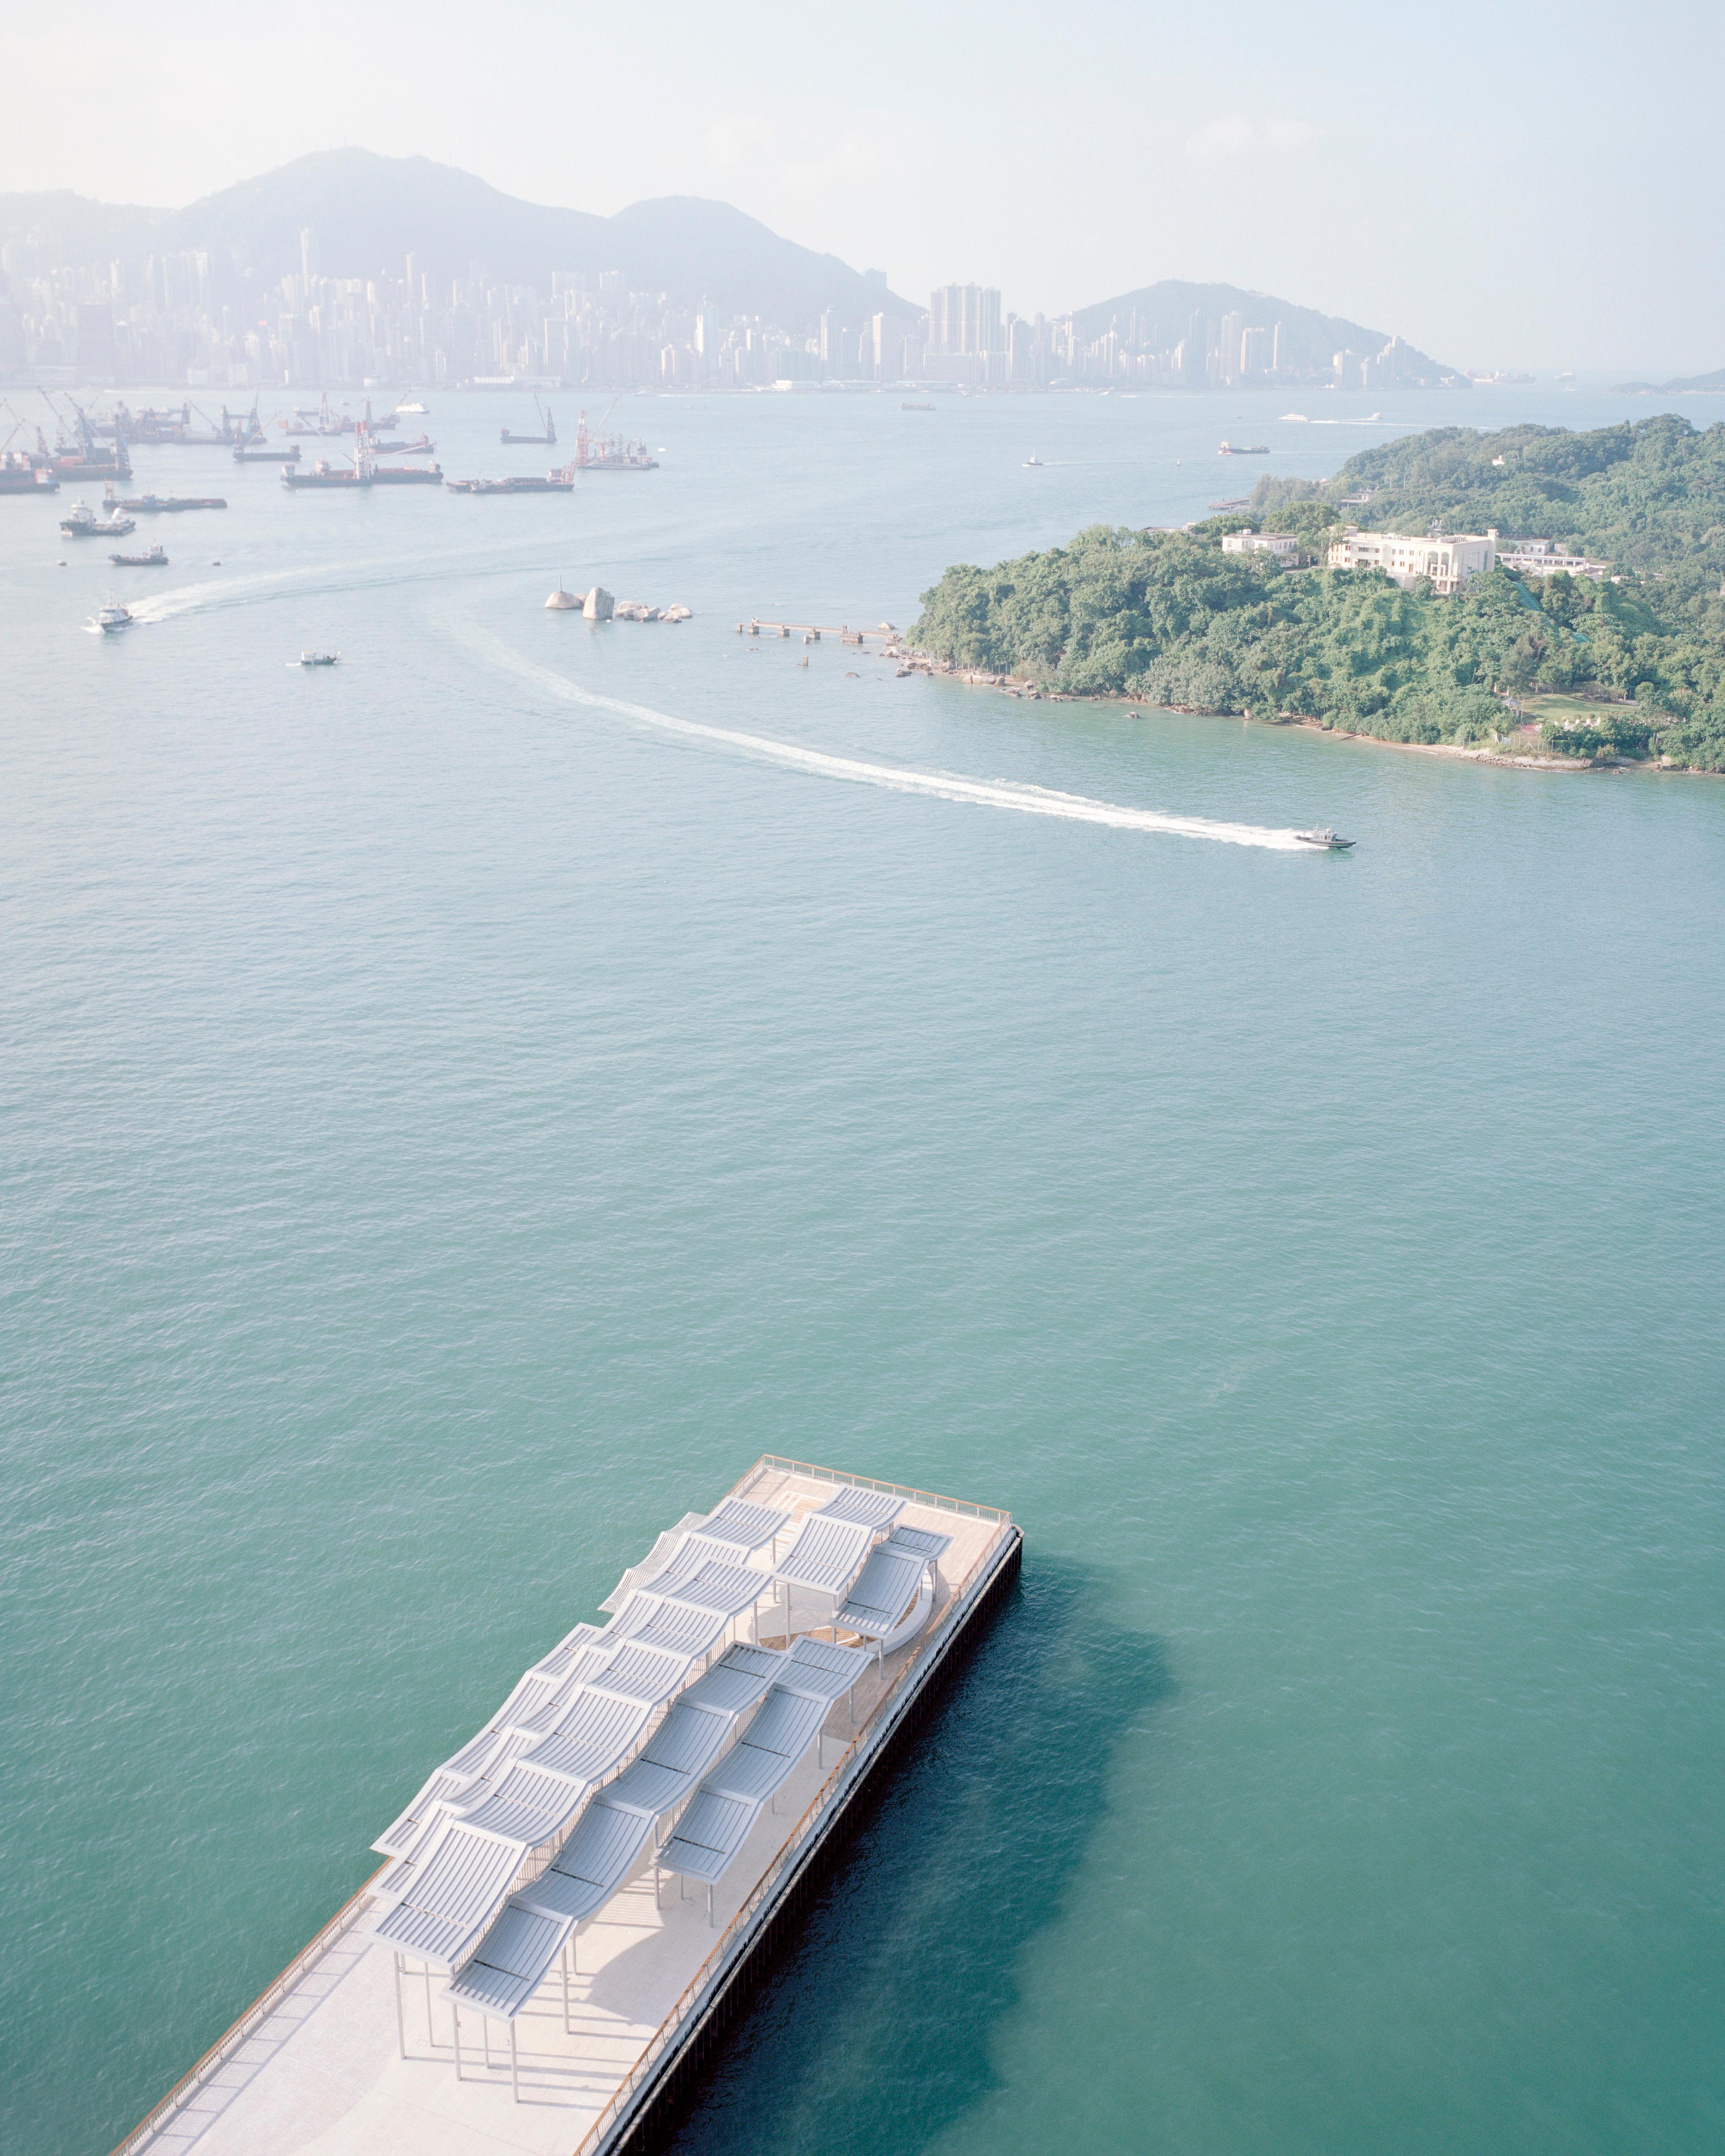 Aerial view of pier canopy with boats and Hong Kong Island in the background